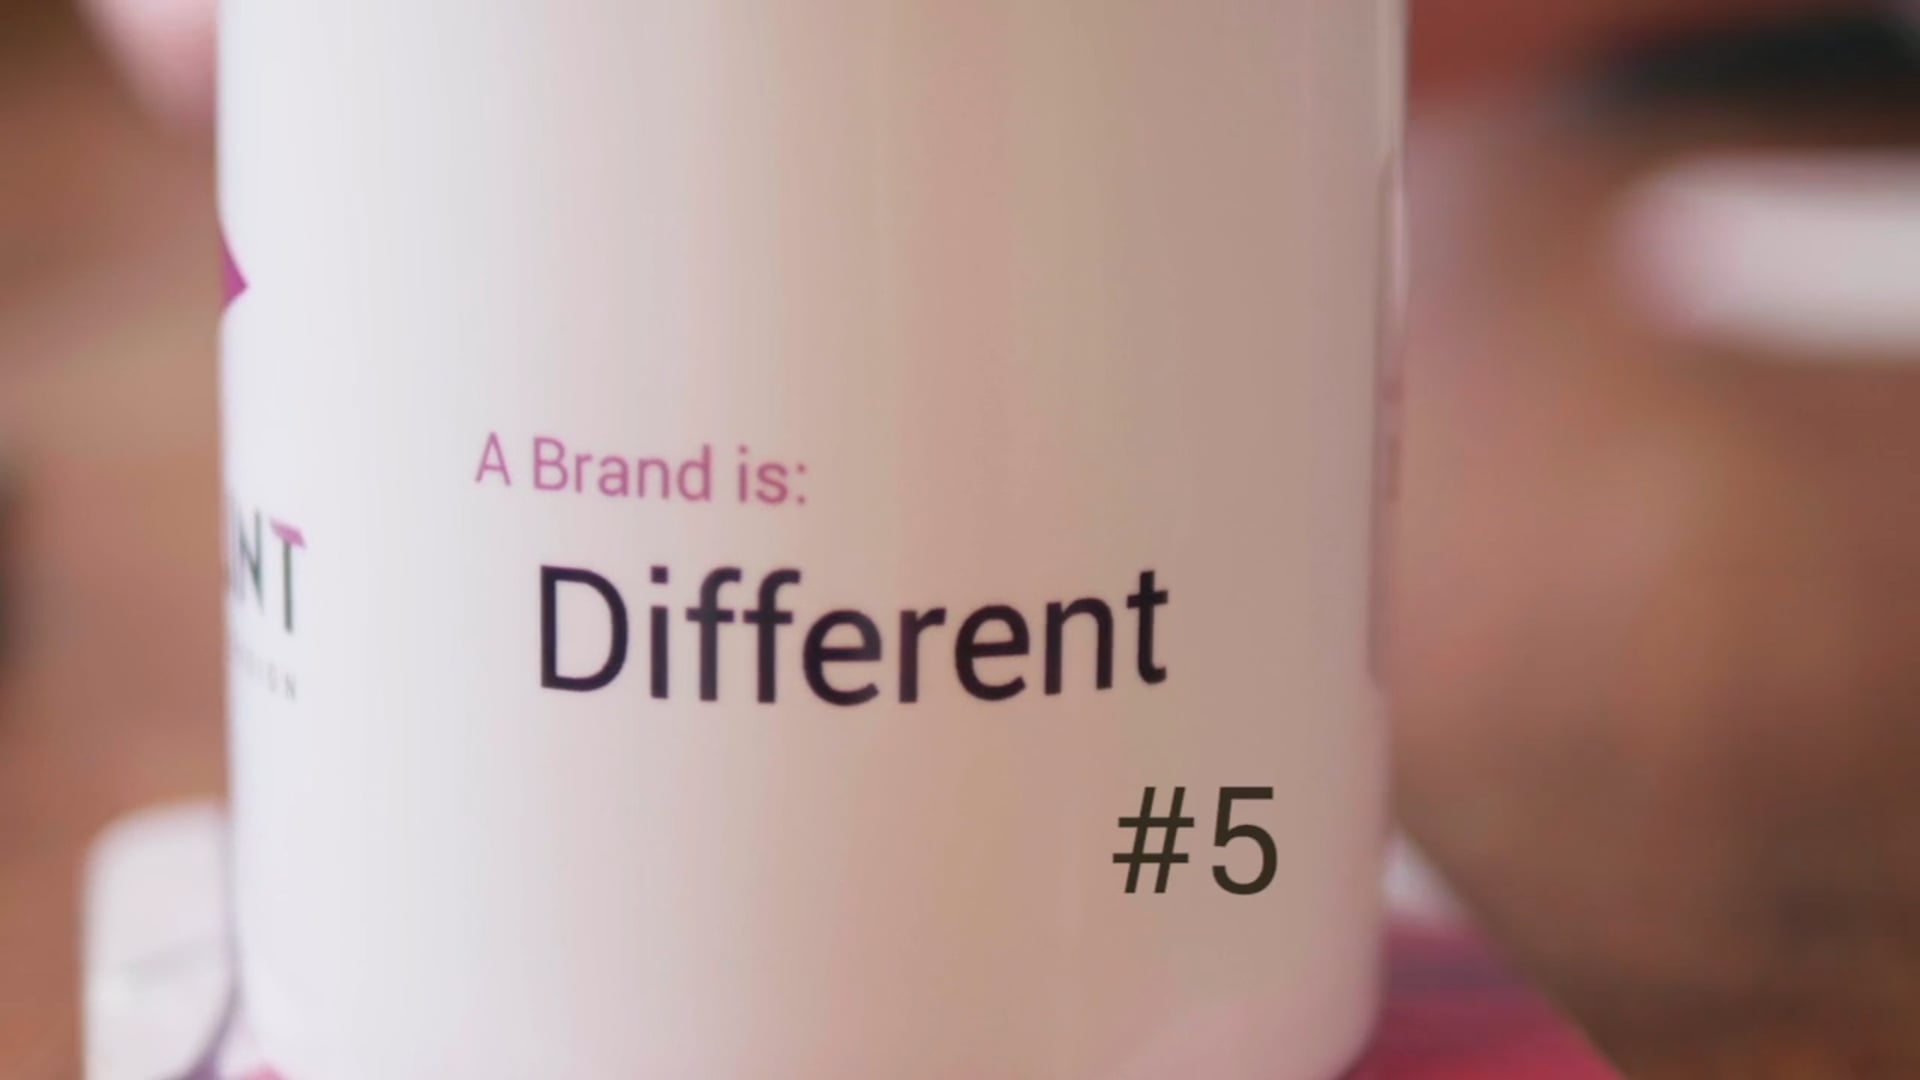 #5. A Brand is: Different